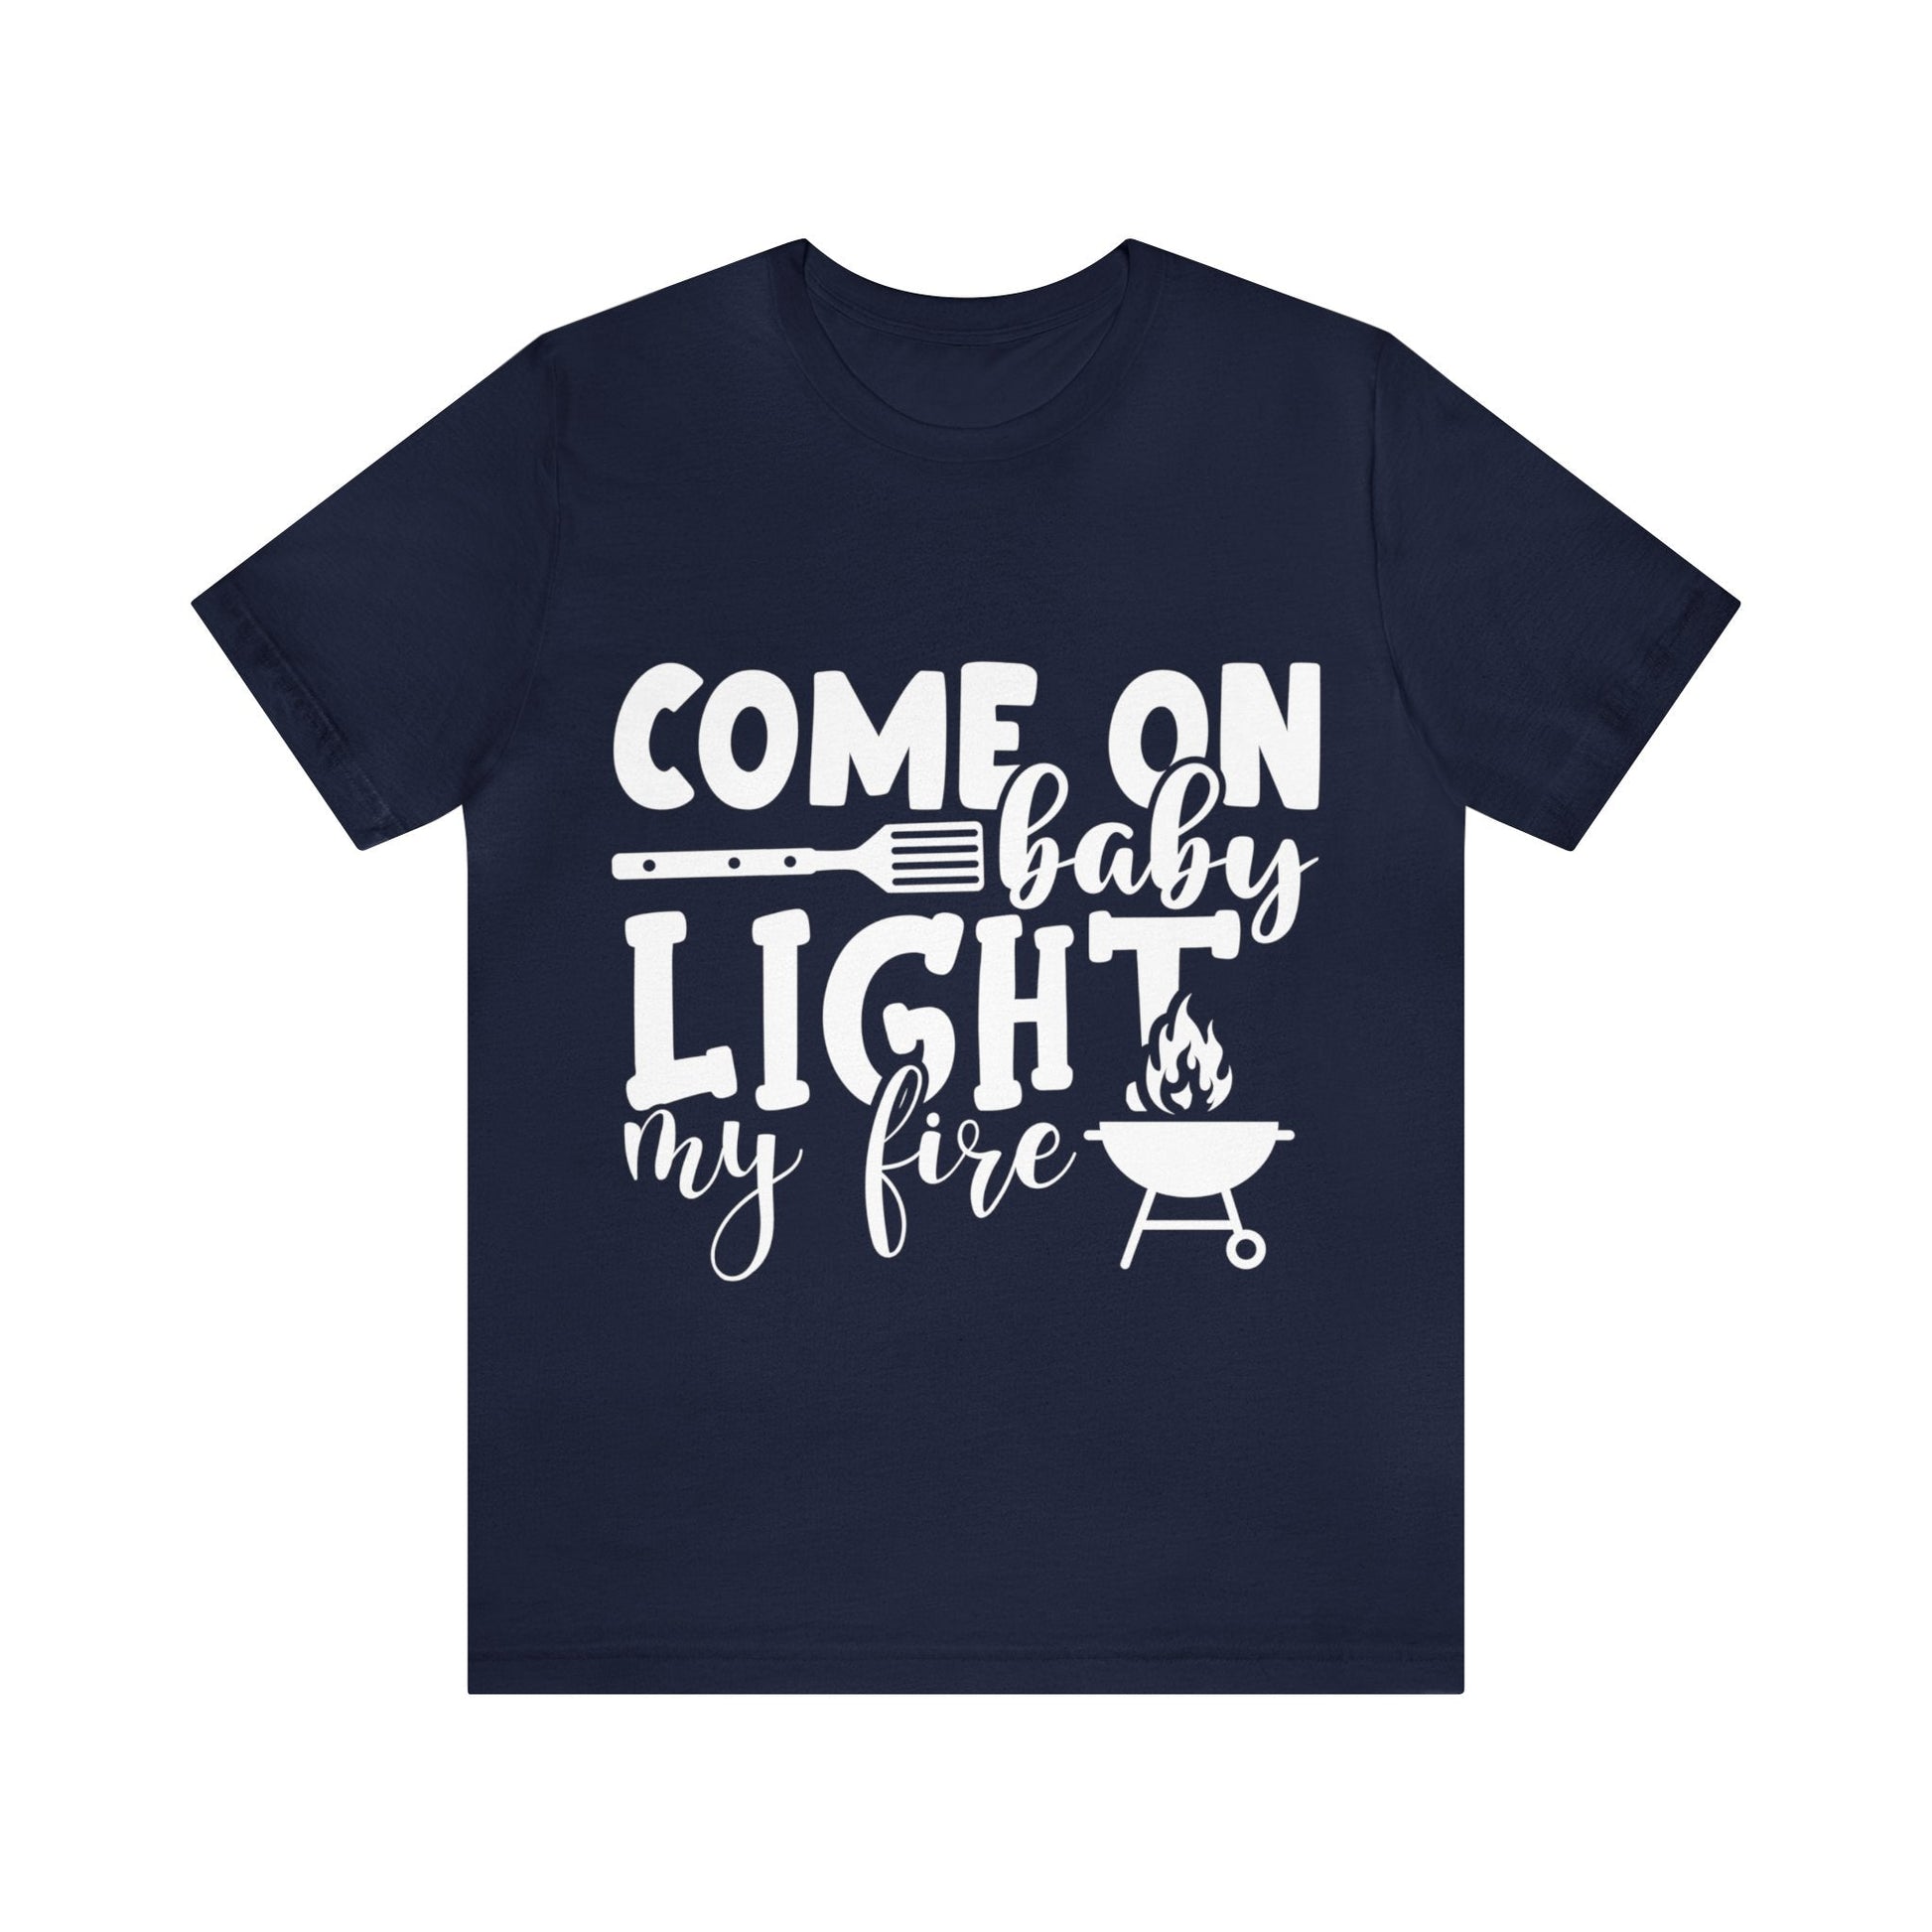 Come on baby light my fire T - Shirt - The Cavemanstyle